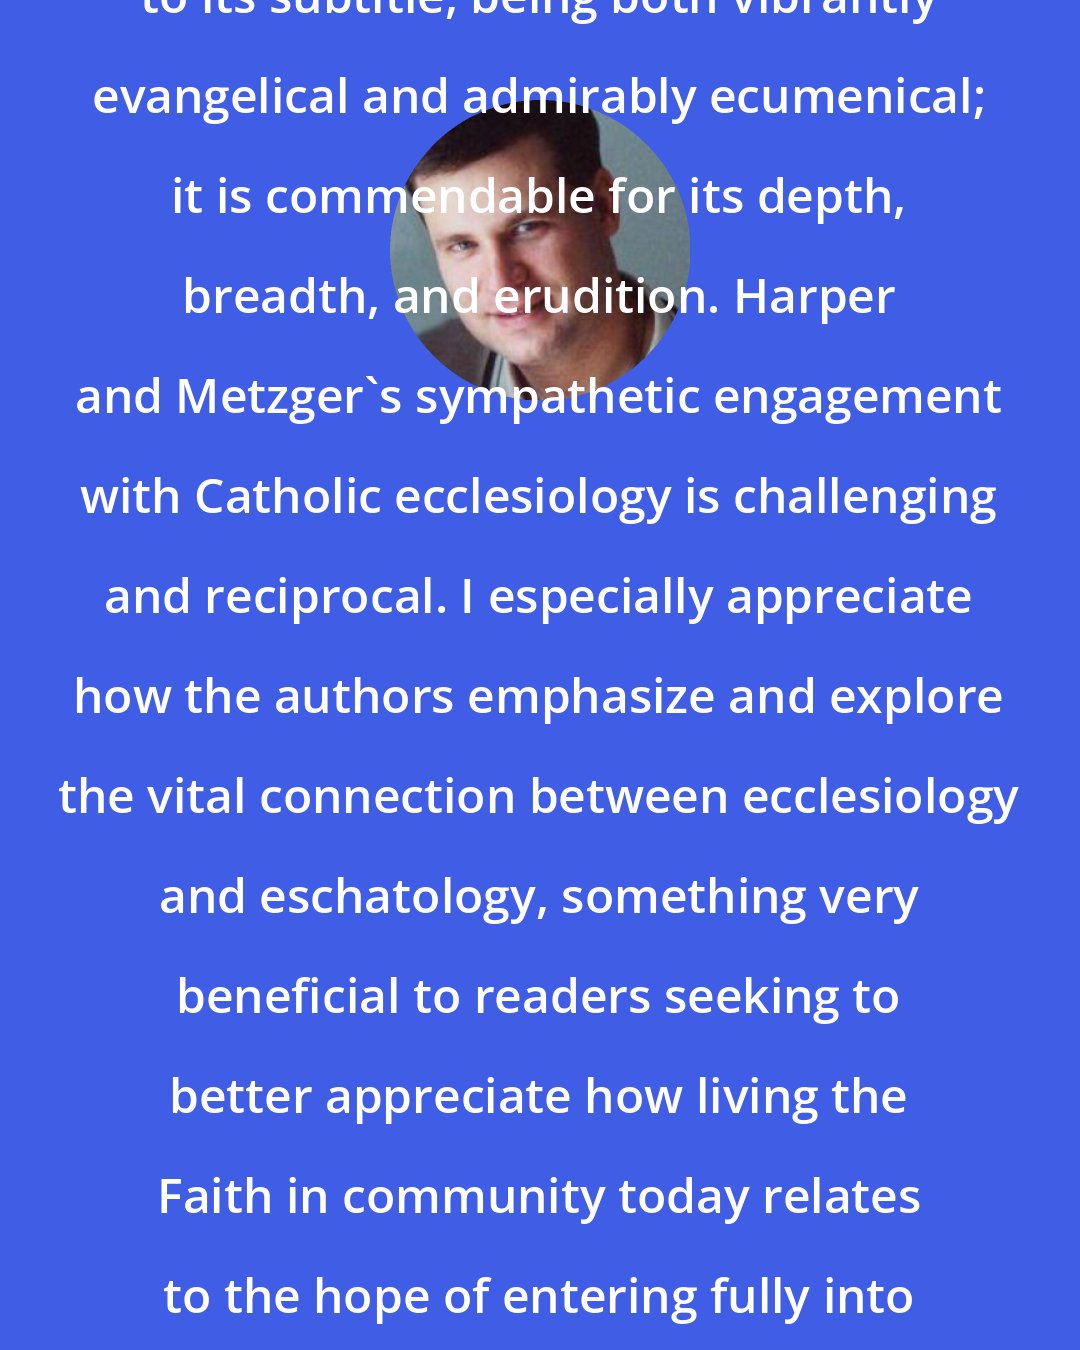 Carl E. Olson: Exploring Ecclesiology is true to its subtitle, being both vibrantly evangelical and admirably ecumenical; it is commendable for its depth, breadth, and erudition. Harper and Metzger's sympathetic engagement with Catholic ecclesiology is challenging and reciprocal. I especially appreciate how the authors emphasize and explore the vital connection between ecclesiology and eschatology, something very beneficial to readers seeking to better appreciate how living the Faith in community today relates to the hope of entering fully into Trinitarian communion in the life to come.